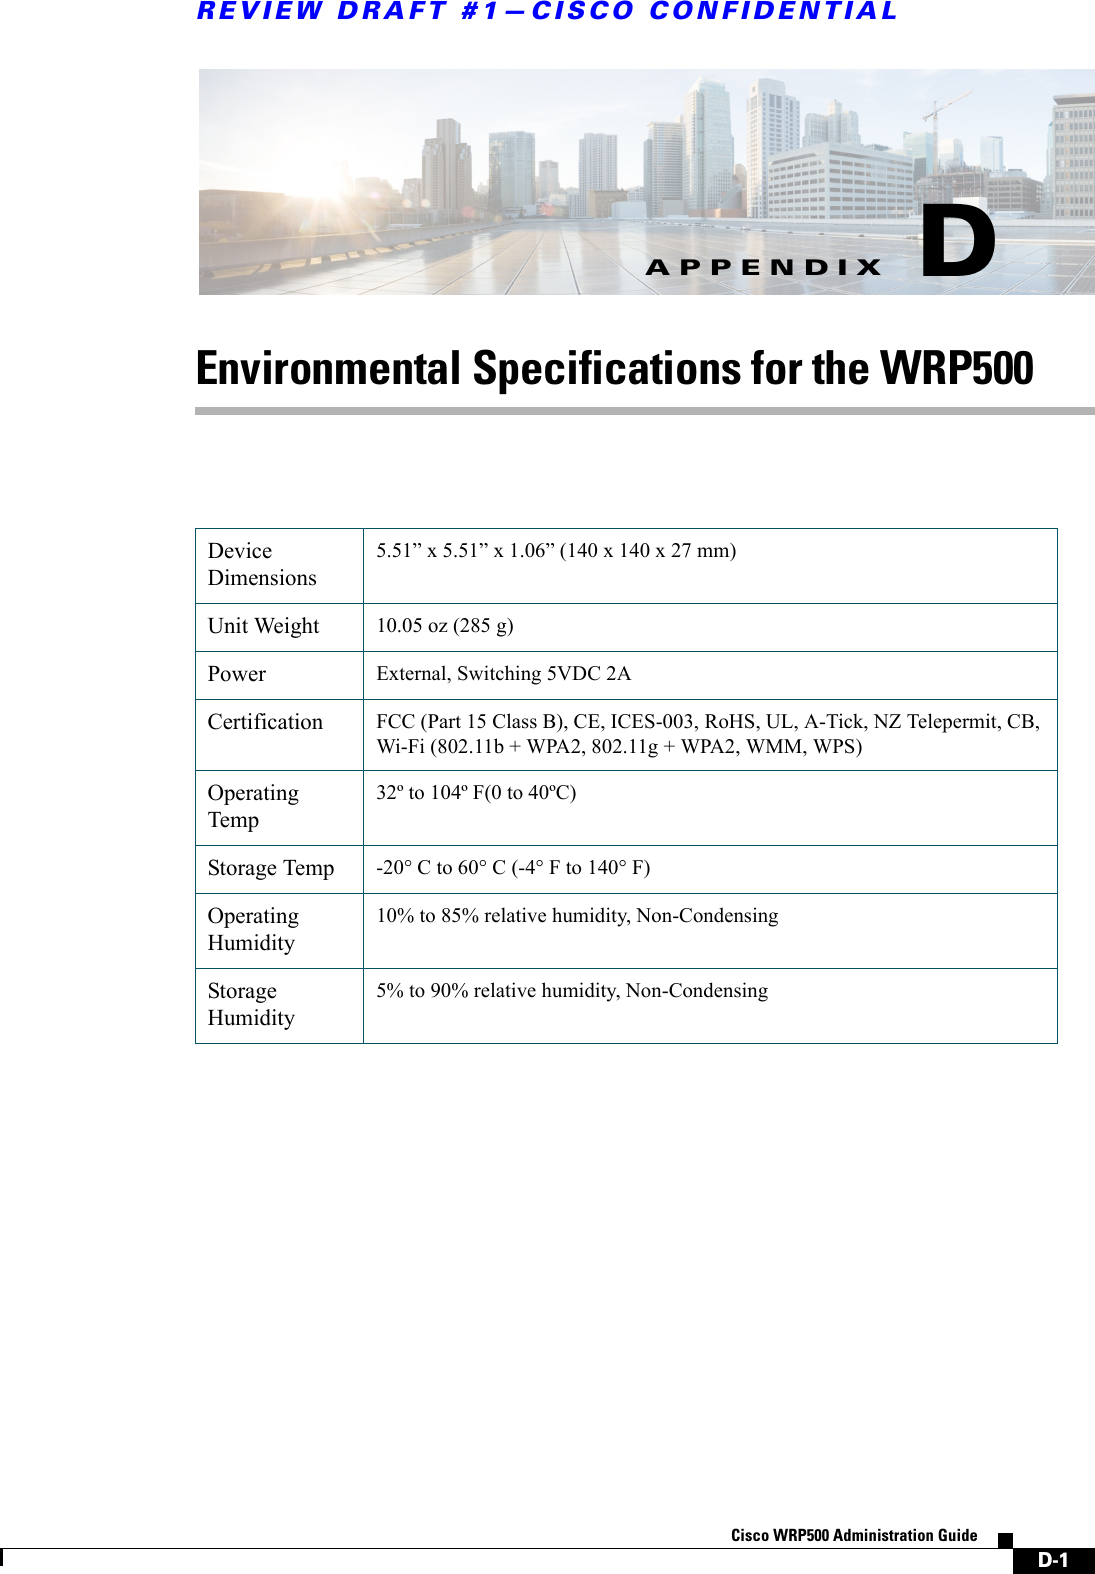 D-1Cisco WRP500 Administration Guide APPENDIXREVIEW DRAFT #1—CISCO CONFIDENTIALDEnvironmental Specifications for the WRP500Device Dimensions5.51” x 5.51” x 1.06” (140 x 140 x 27 mm) Unit Weight 10.05 oz (285 g)Power External, Switching 5VDC 2A Certification FCC (Part 15 Class B), CE, ICES-003, RoHS, UL, A-Tick, NZ Telepermit, CB, Wi-Fi (802.11b + WPA2, 802.11g + WPA2, WMM, WPS)Operating Temp32º to 104º F(0 to 40ºC) Storage Temp -20° C to 60° C (-4° F to 140° F)Operating Humidity10% to 85% relative humidity, Non-CondensingStorage Humidity5% to 90% relative humidity, Non-Condensing